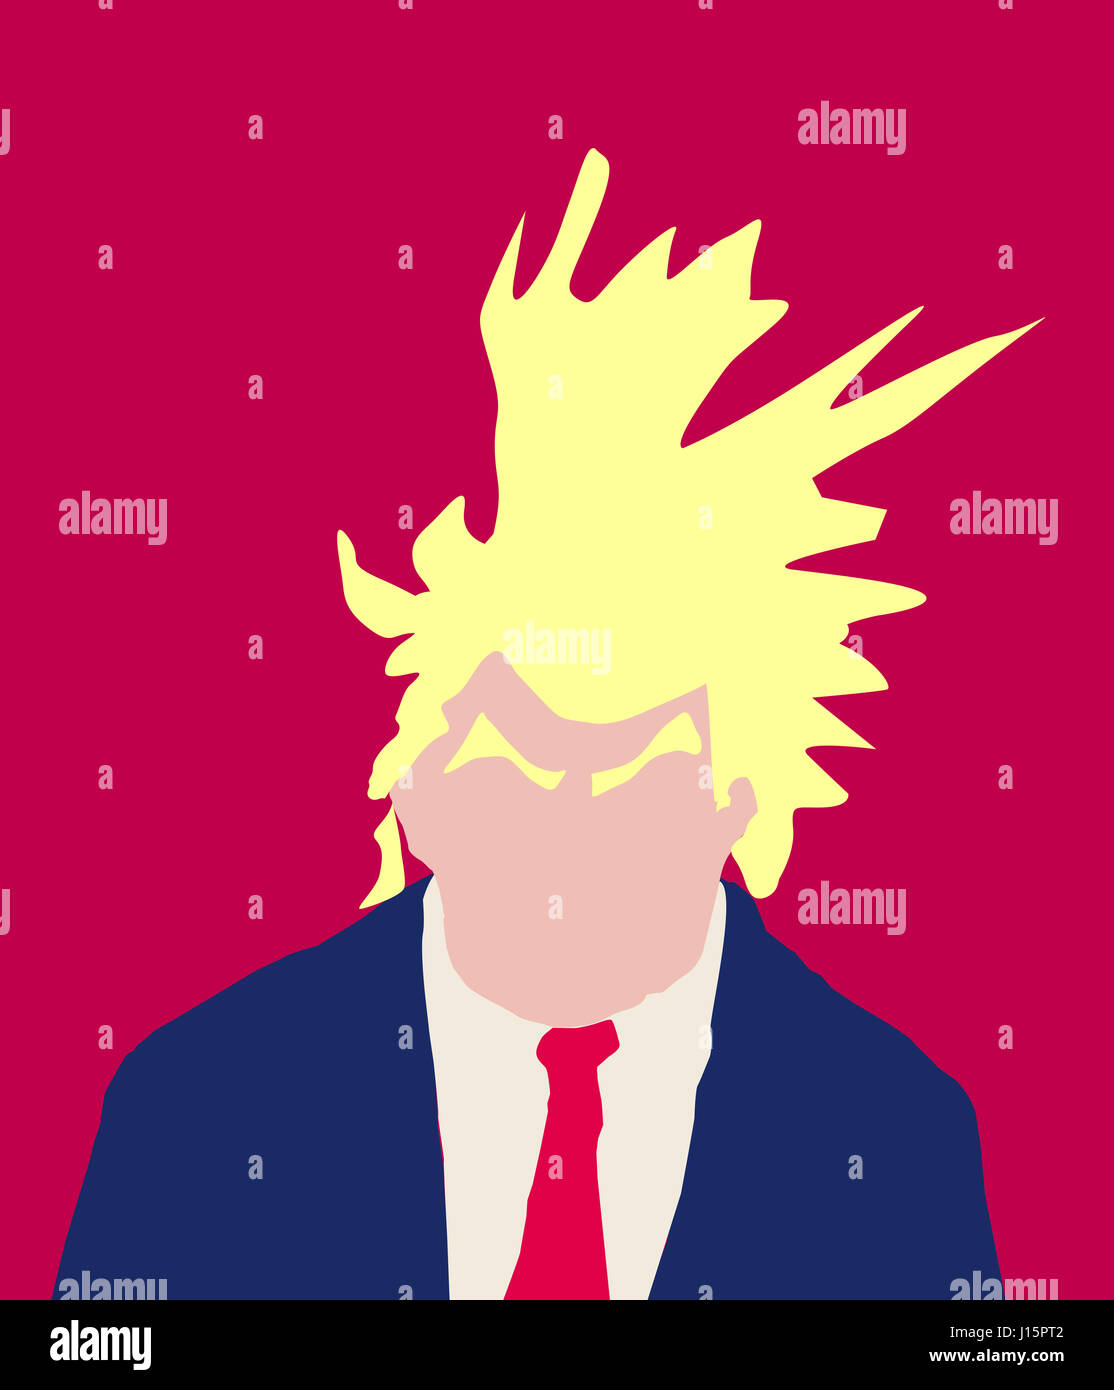 April 18, 2017. Abstract of Donald Trump with crazy hairdo and bushy eyebrows Stock Photo